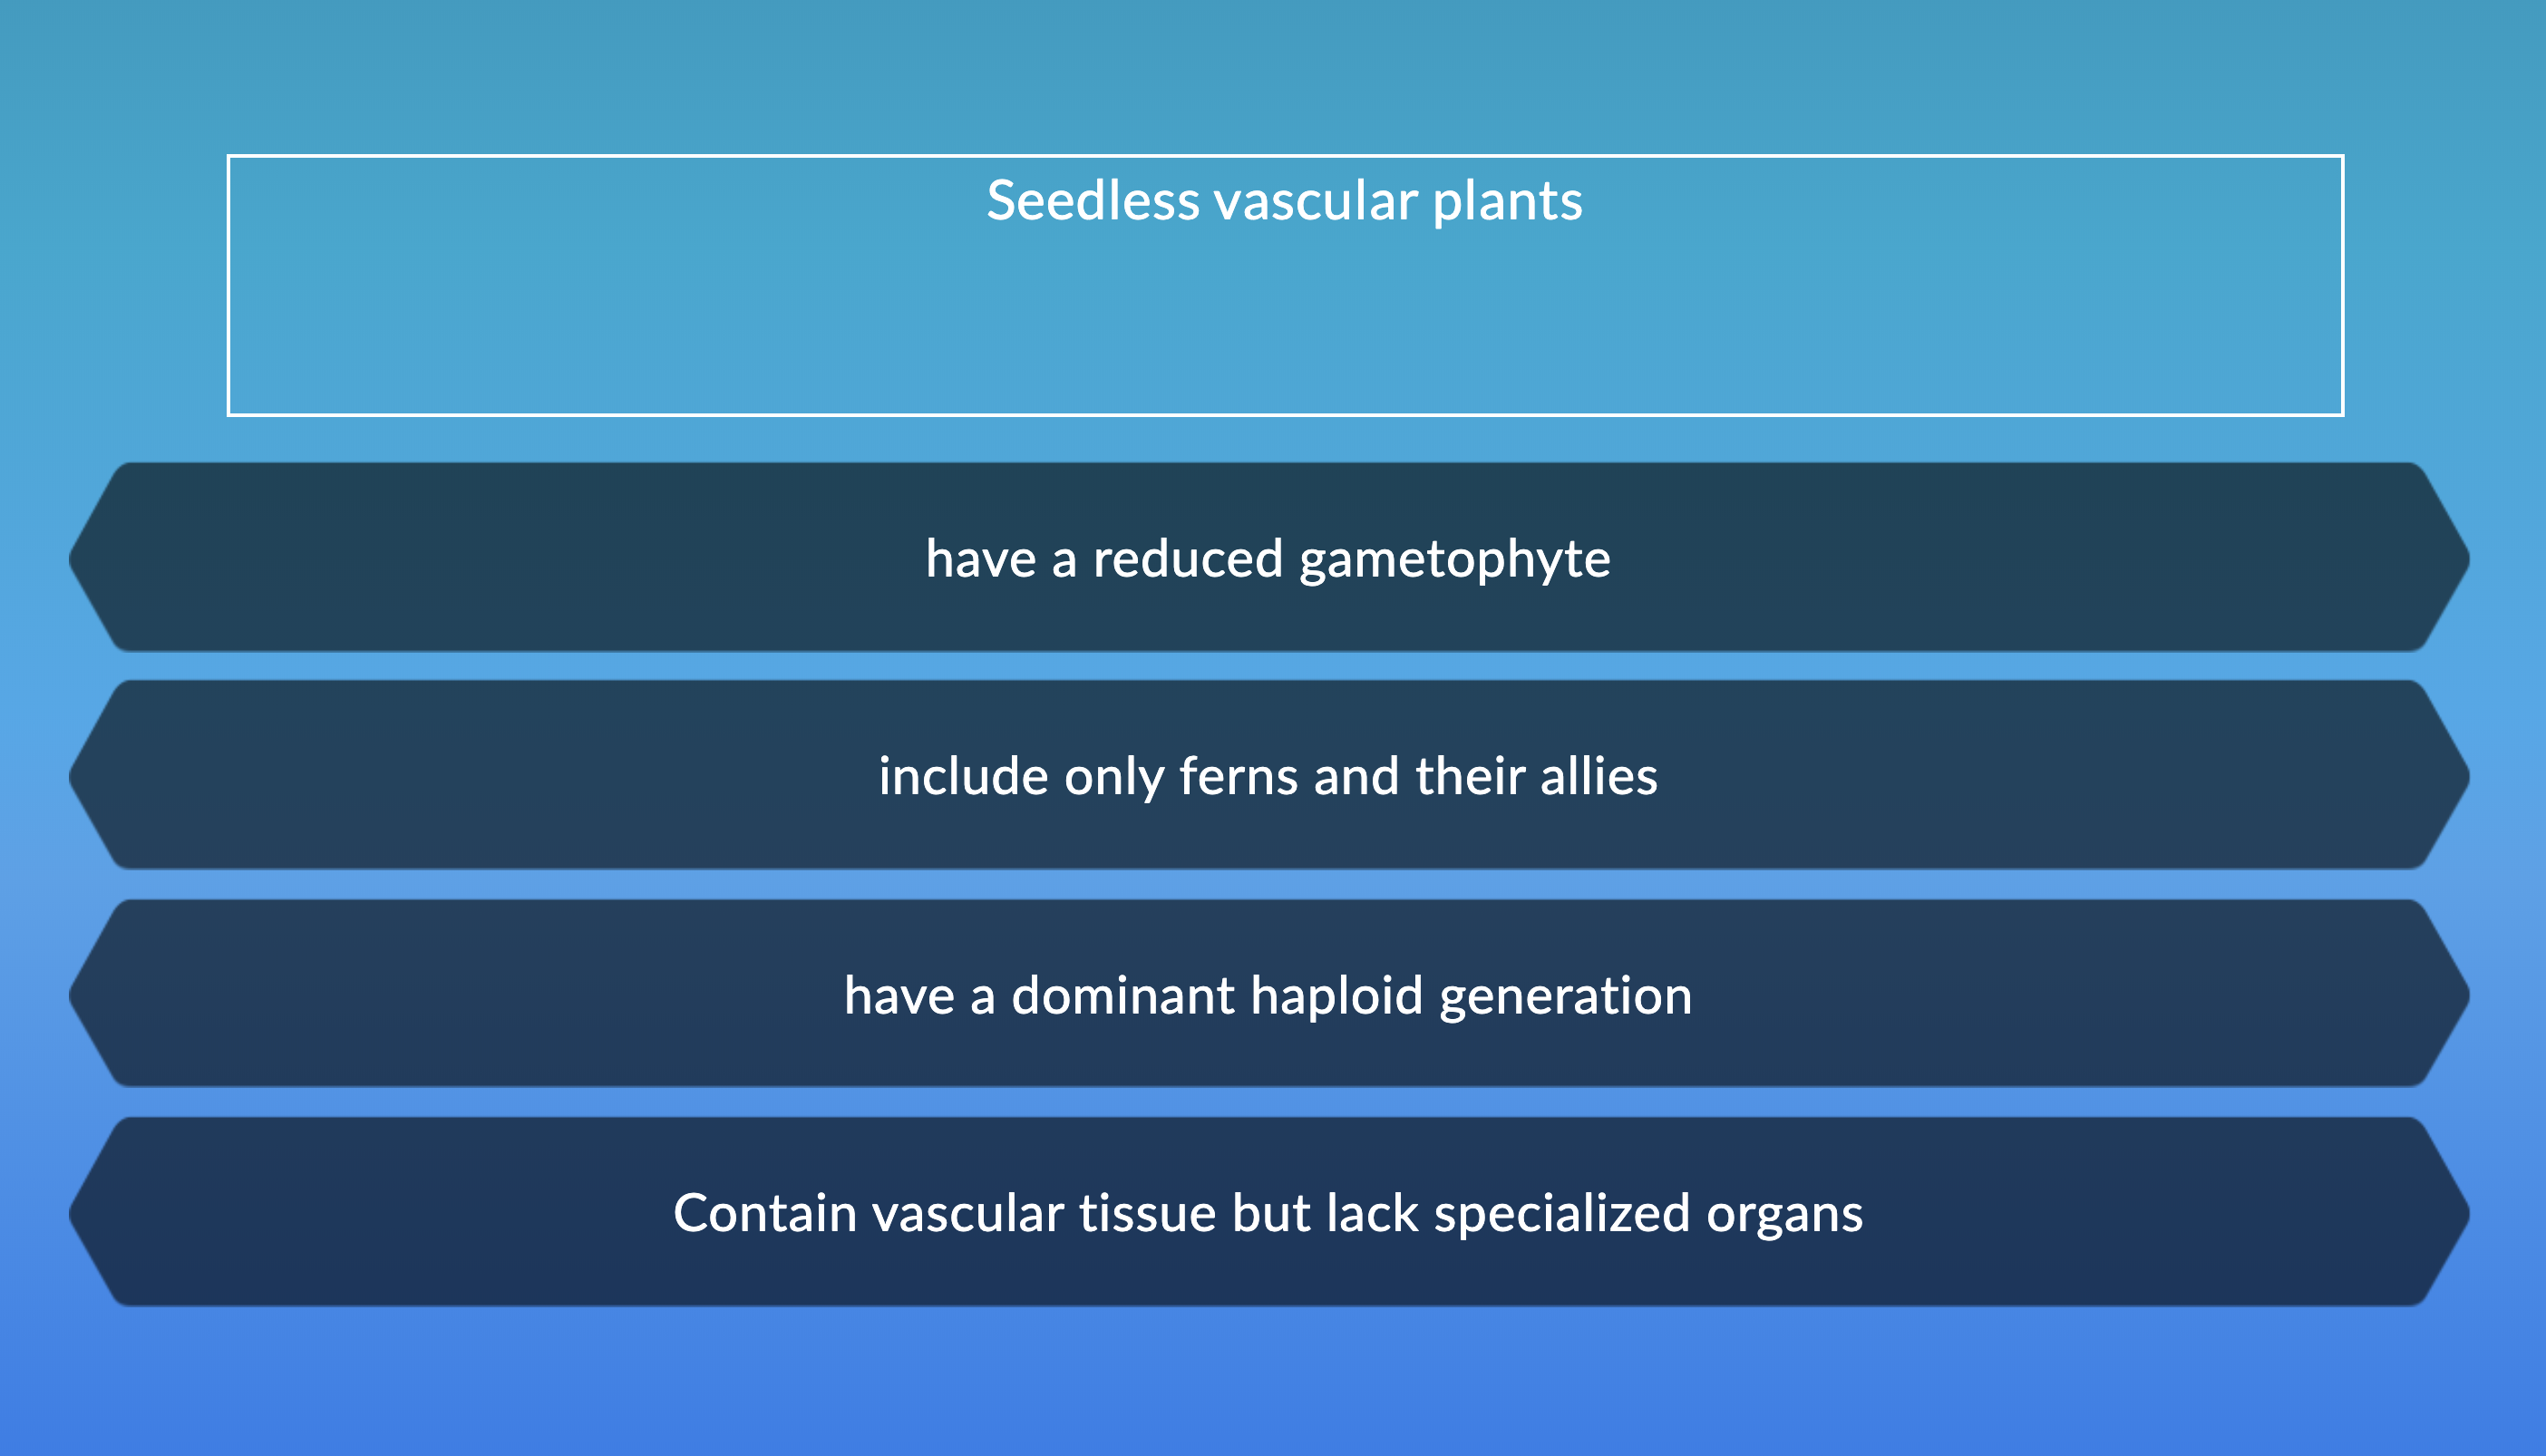 Seedless vascular plants
have a reduced gametophyte
include only ferns and their allies
have a dominant haploid generation
Contain vascular tissue but lack specialized organs
